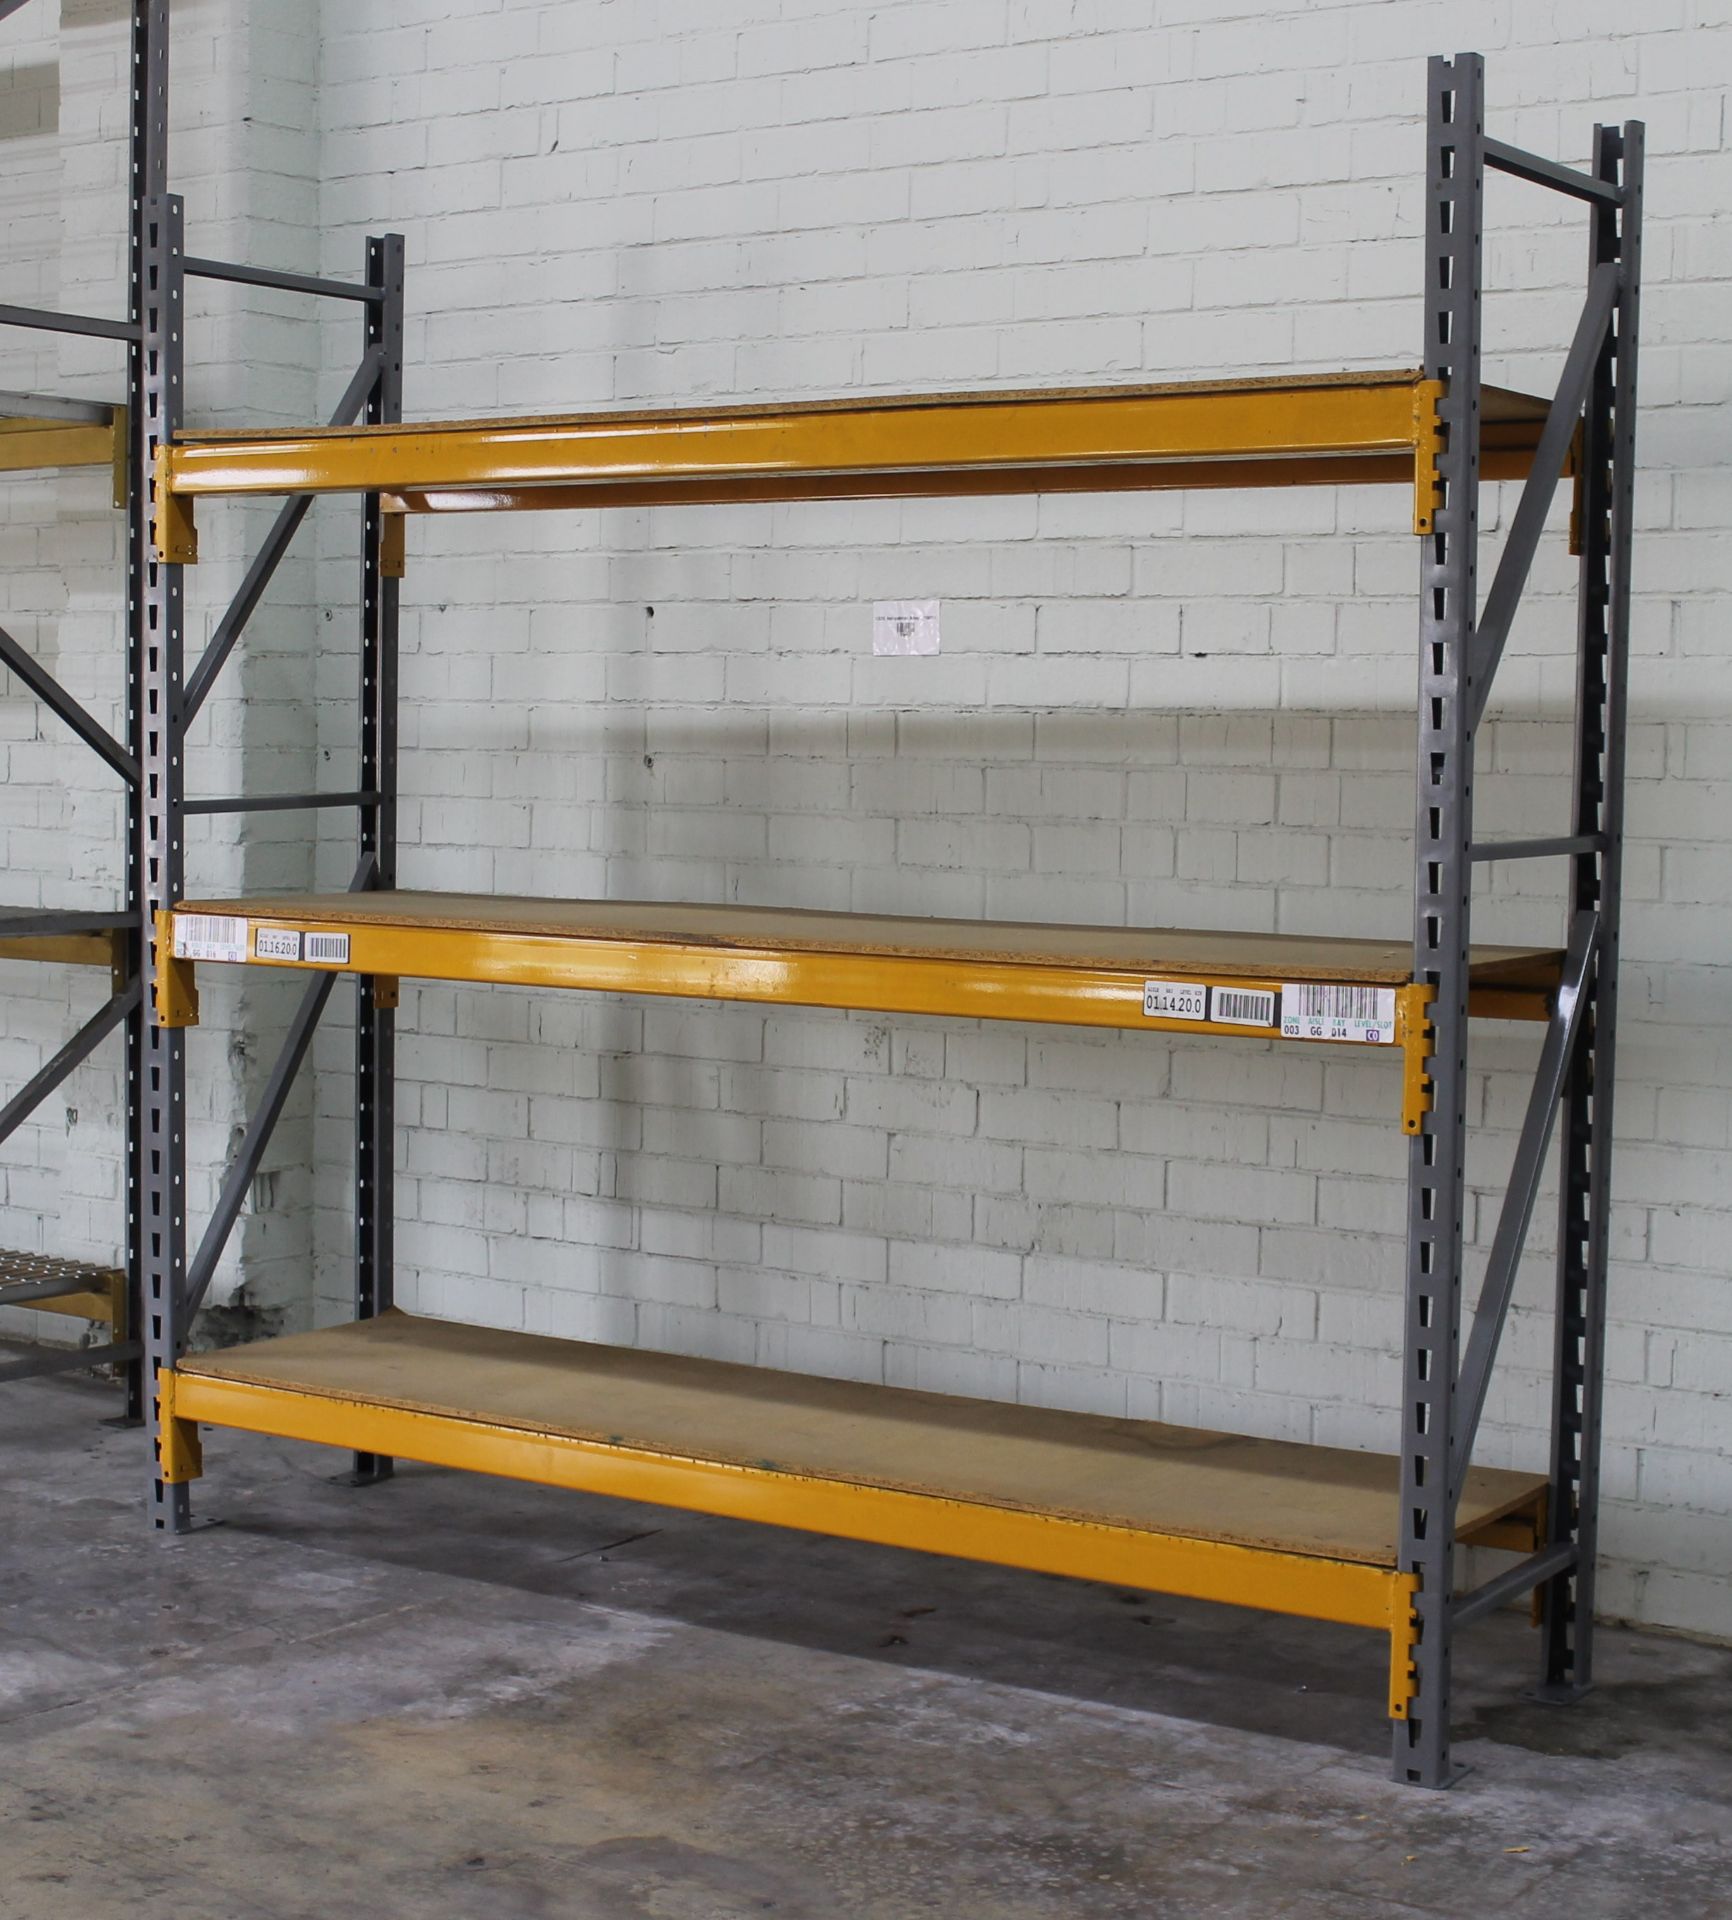 NEW 20 SECTIONS OF 96"H X 24"D X 96"L STOCK ROOM PALLET RACK SHELVING - Image 3 of 3